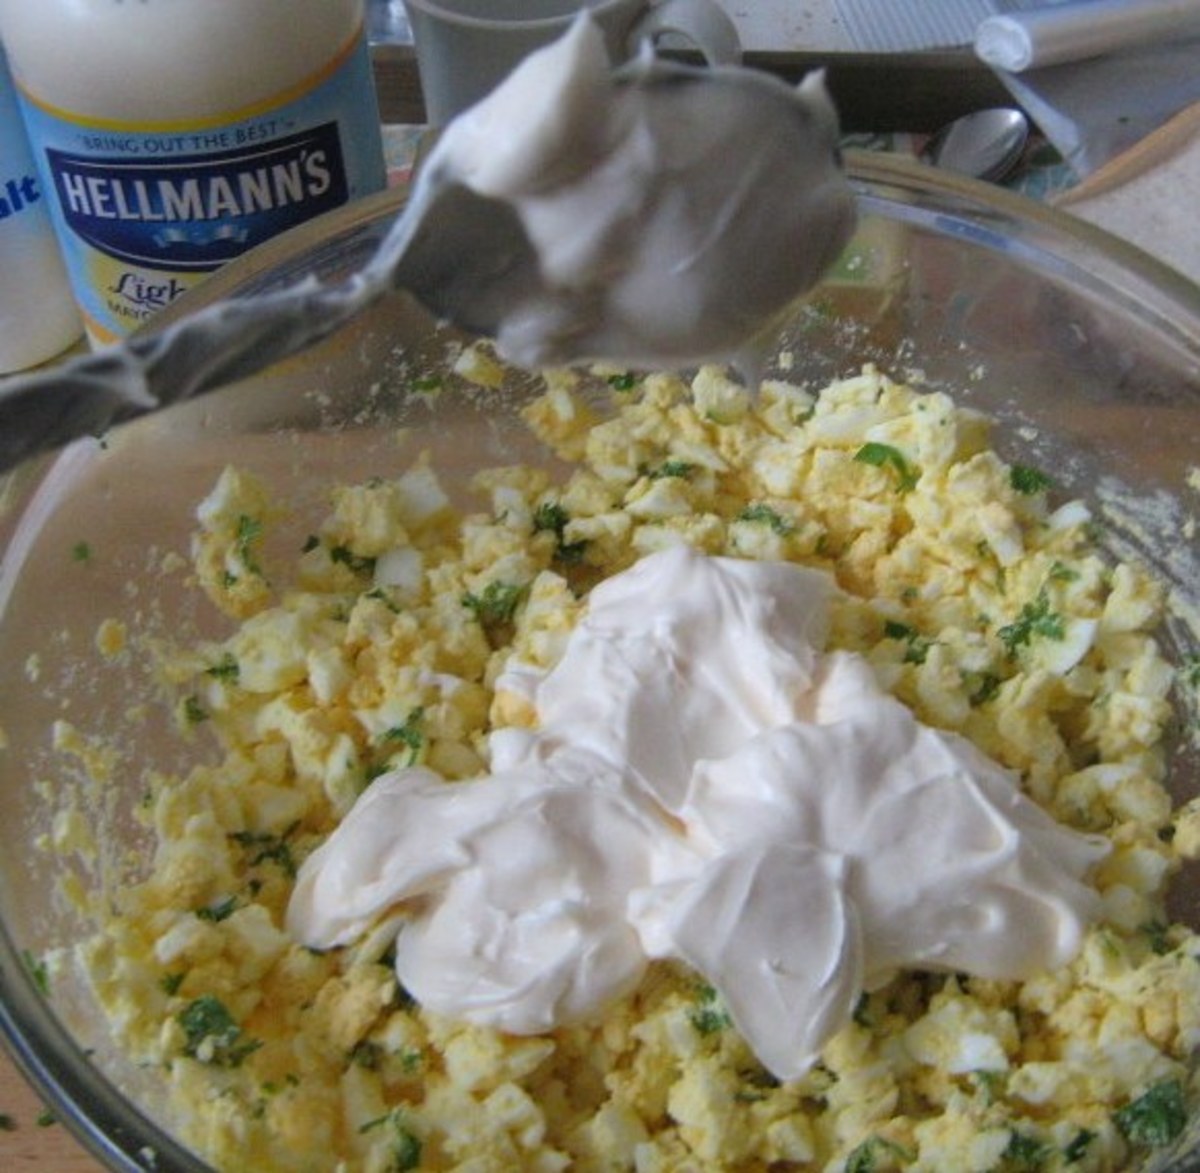 Take a few large spoons of mayonnaise and mix it with the boiled eggs.